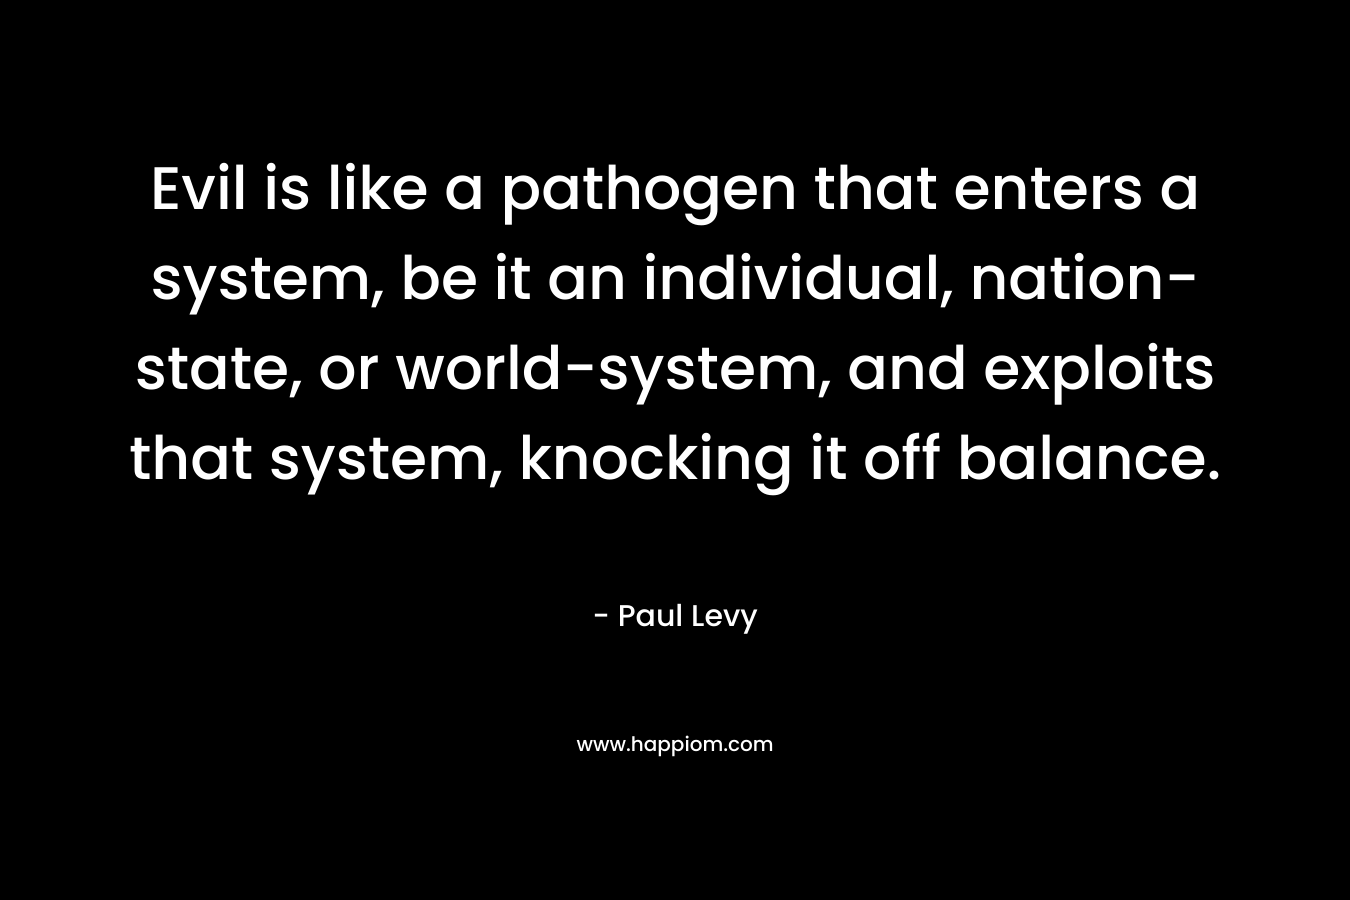 Evil is like a pathogen that enters a system, be it an individual, nation-state, or world-system, and exploits that system, knocking it off balance. – Paul Levy